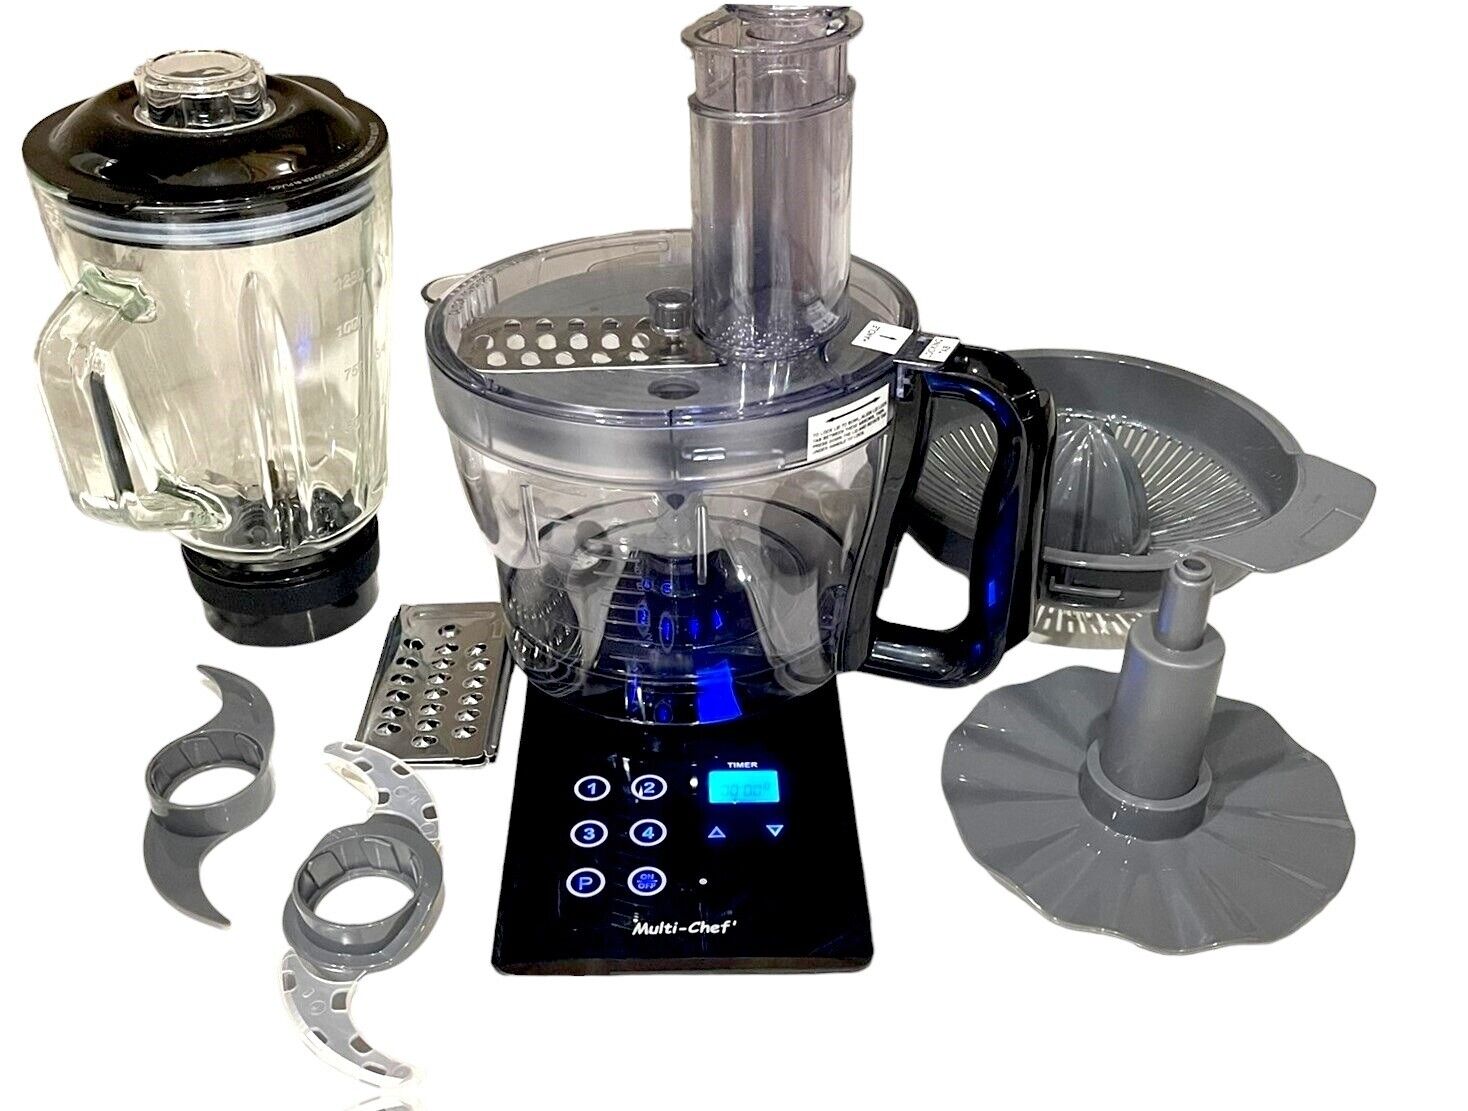 Built-in Blender & Food Processor (re: Nutone Food Center) 1000W in counter moto